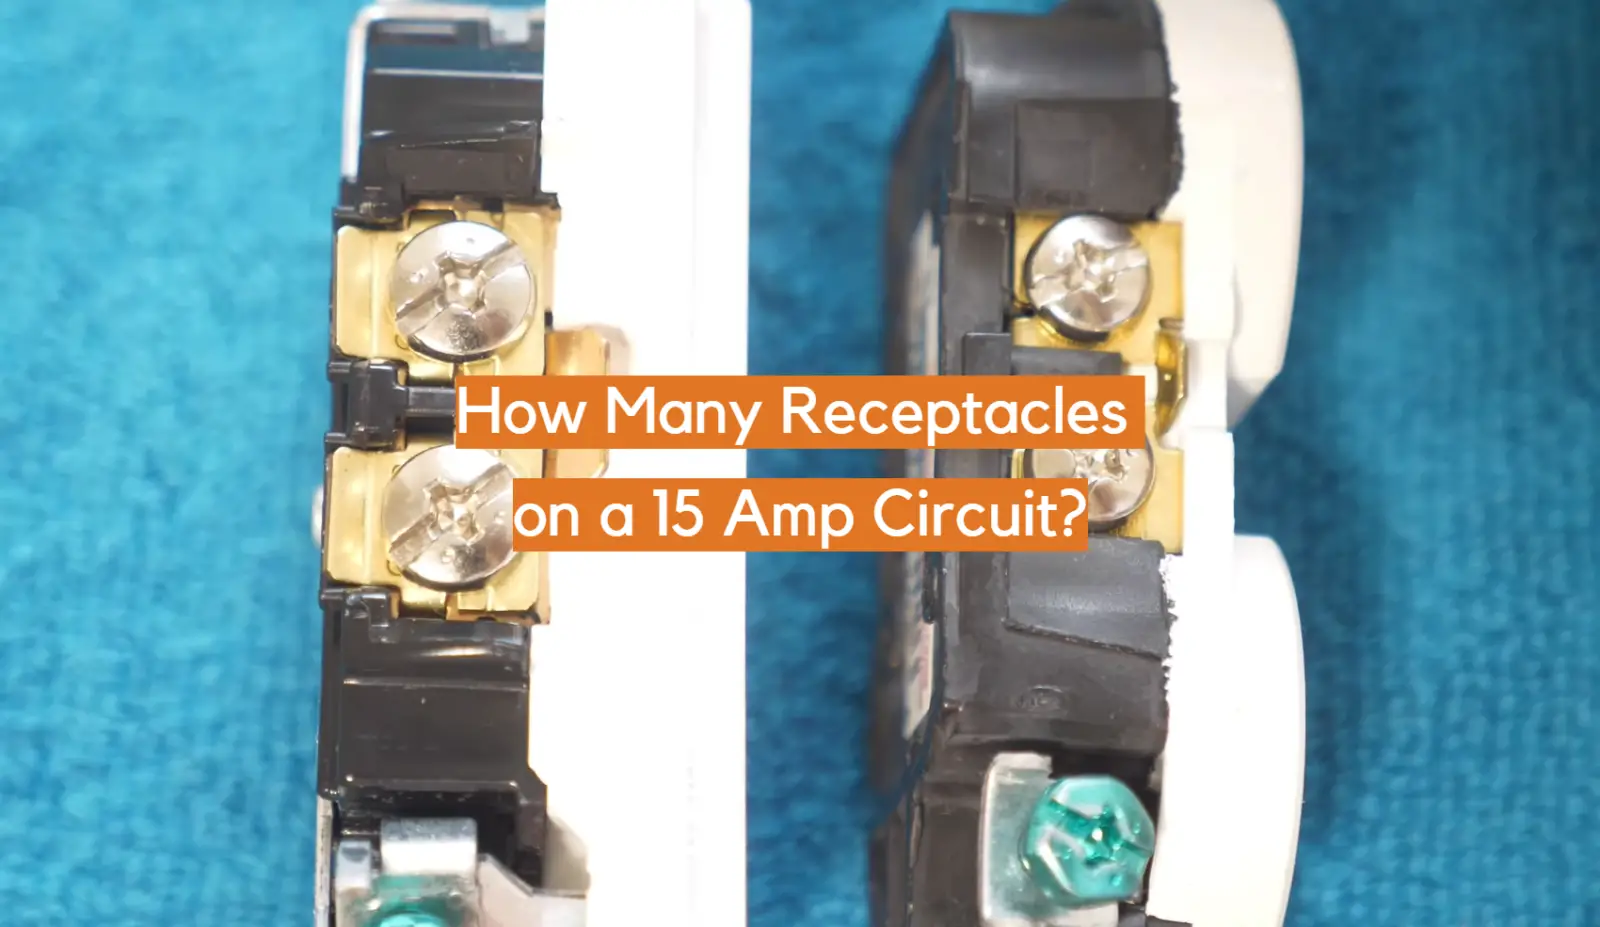 How Many Receptacles on a 15 Amp Circuit?